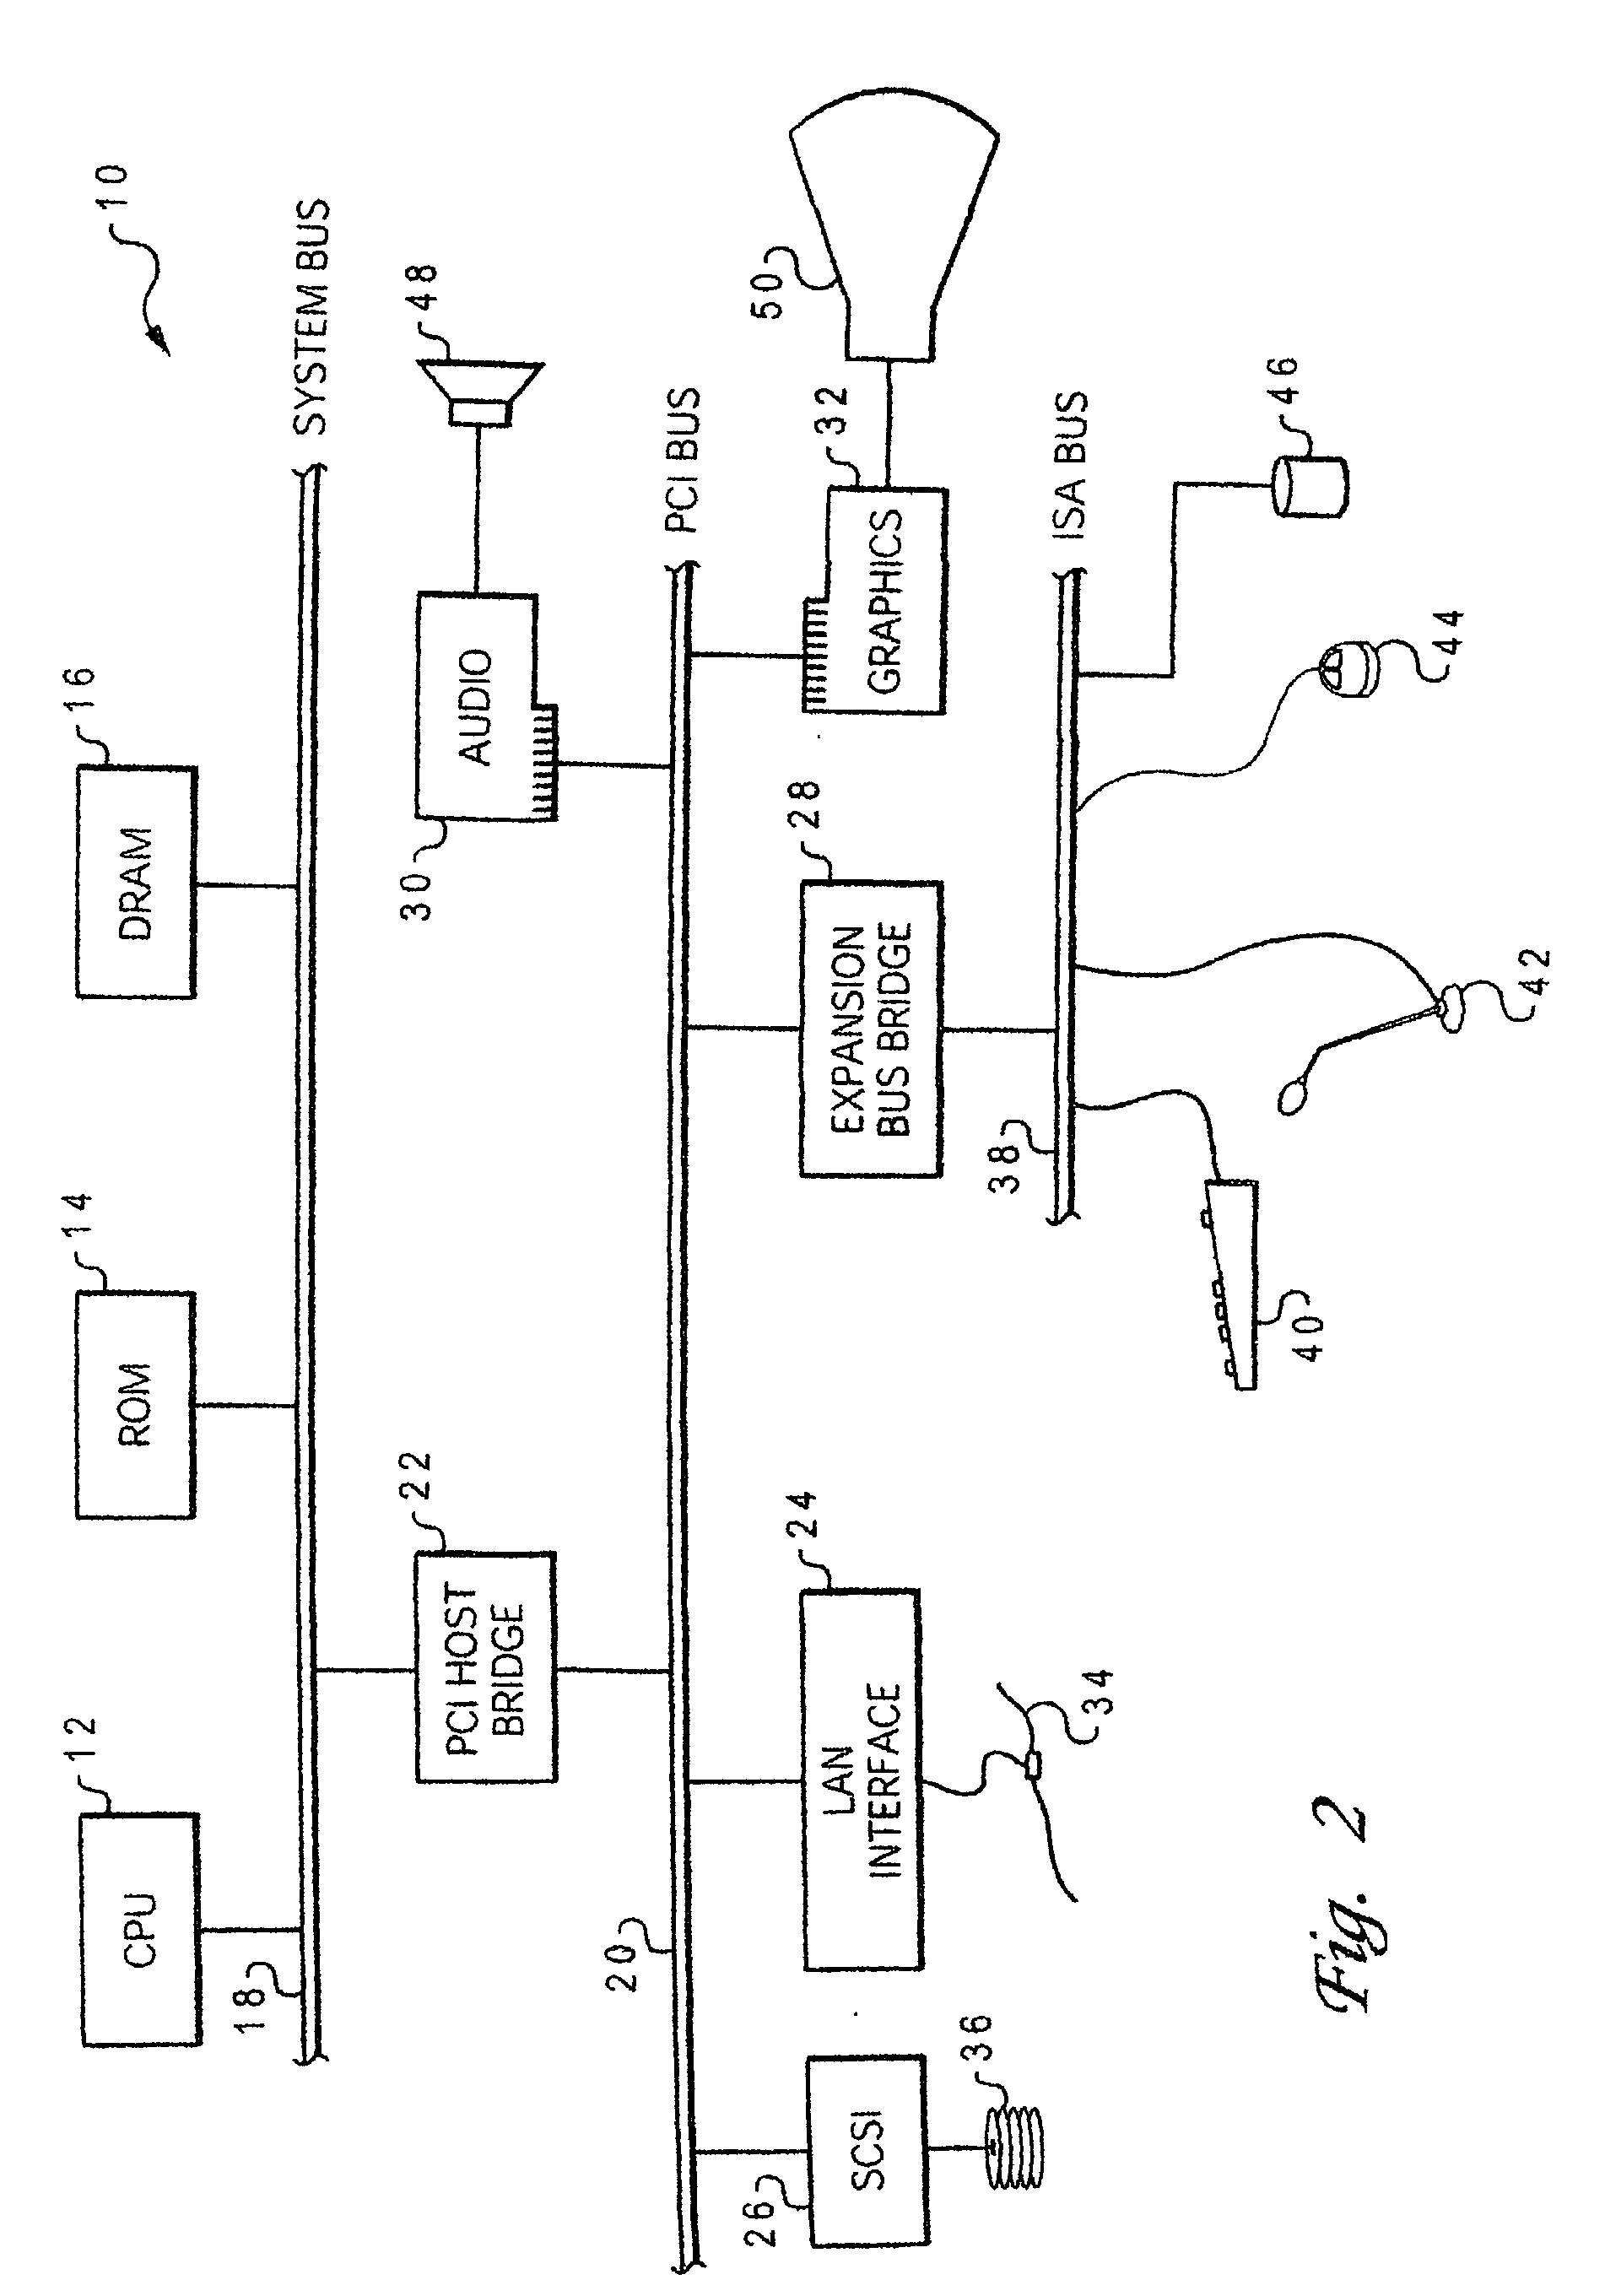 Robust delay metric for RC circuits